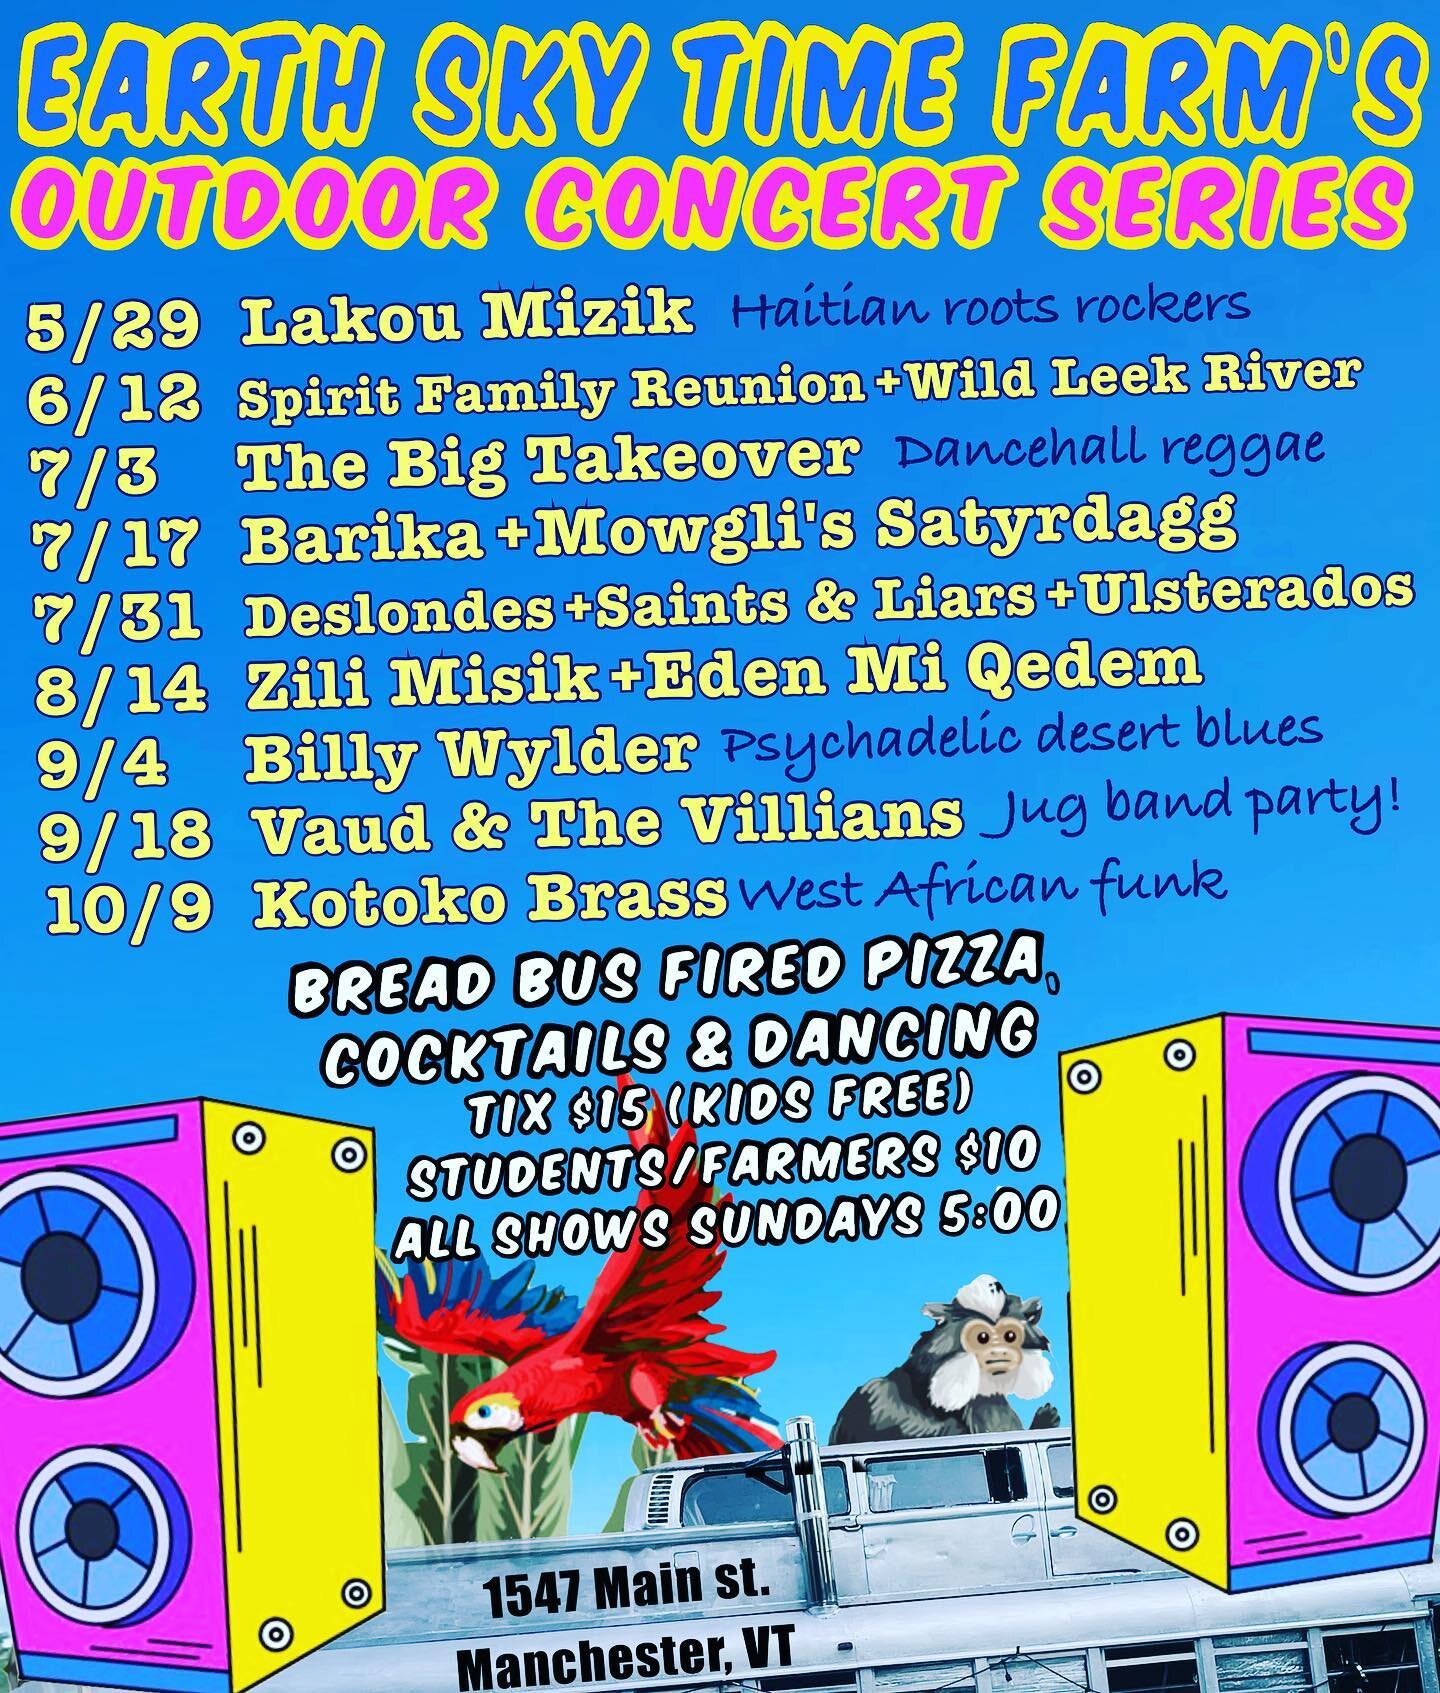 Hey friends,
With great pleasure, we invite y&rsquo;all to celebrate humanity, nature and musical creativity at these 9 body shakin, barn storming, convivial riotous summer concerts and ecstatic dance parties between May and October. Come to as many 